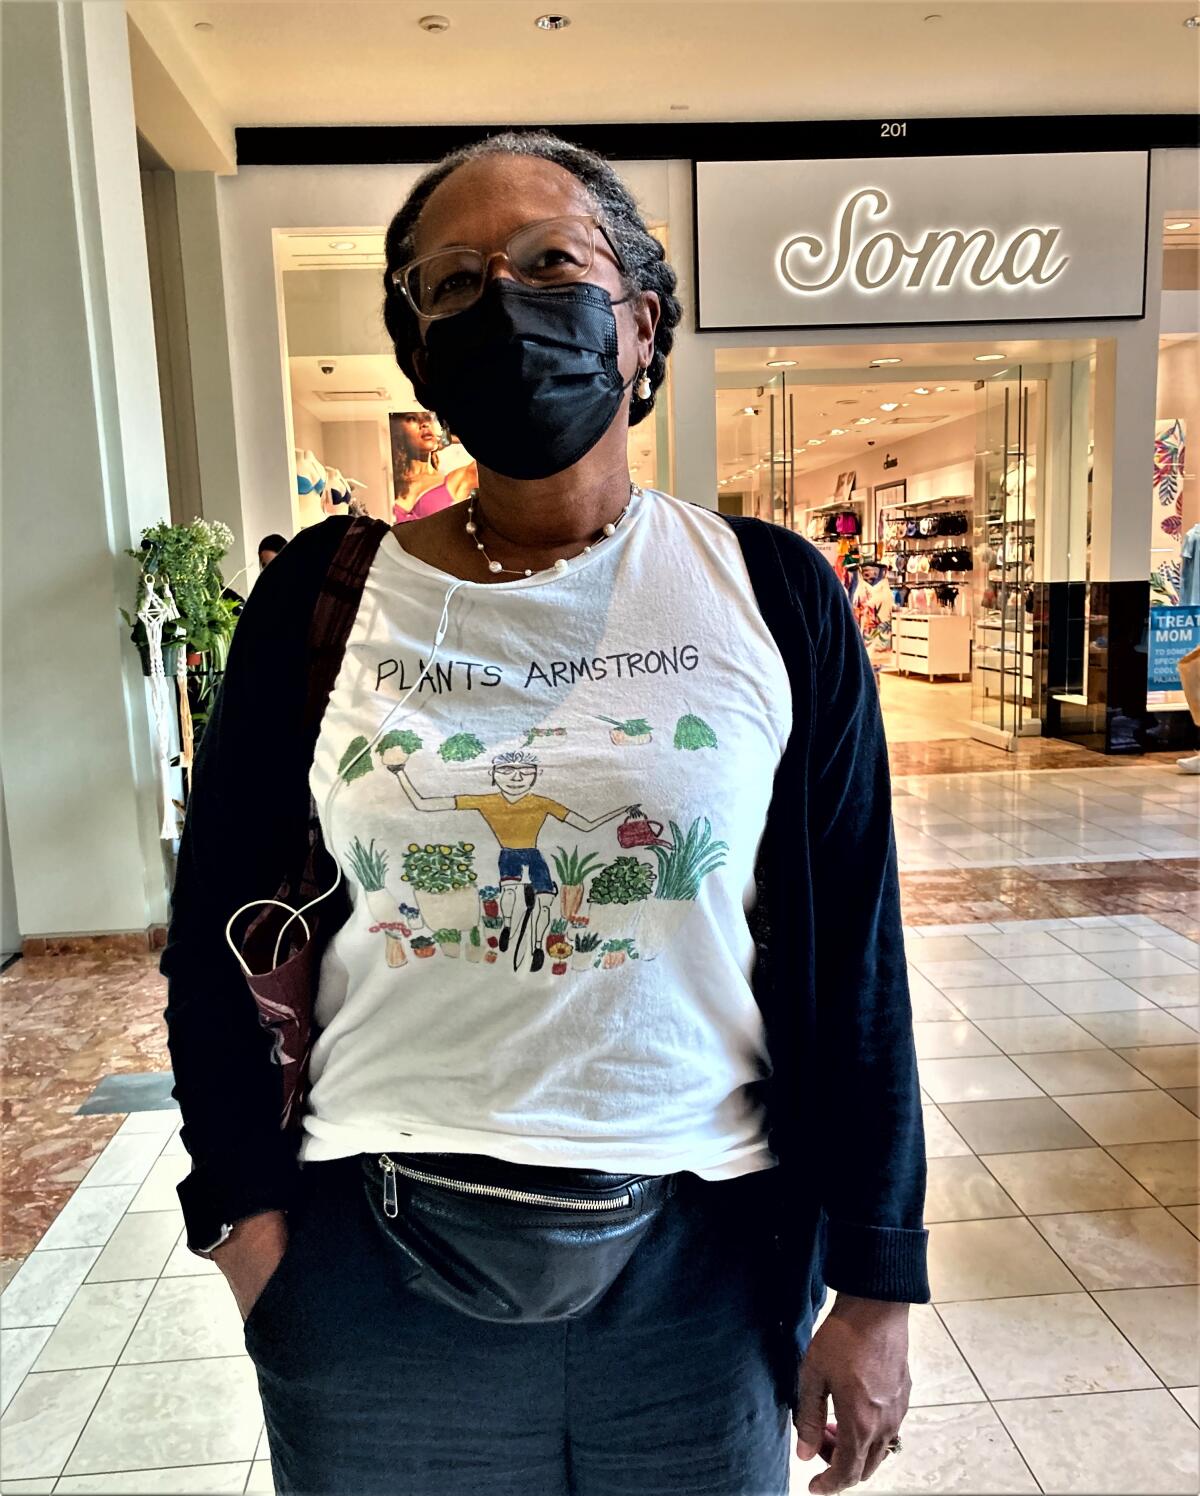 Los Angeles resident Traci Williams wore a special plant-themed shirt Thursday to South Coast Plaza's Spring Garden Show.